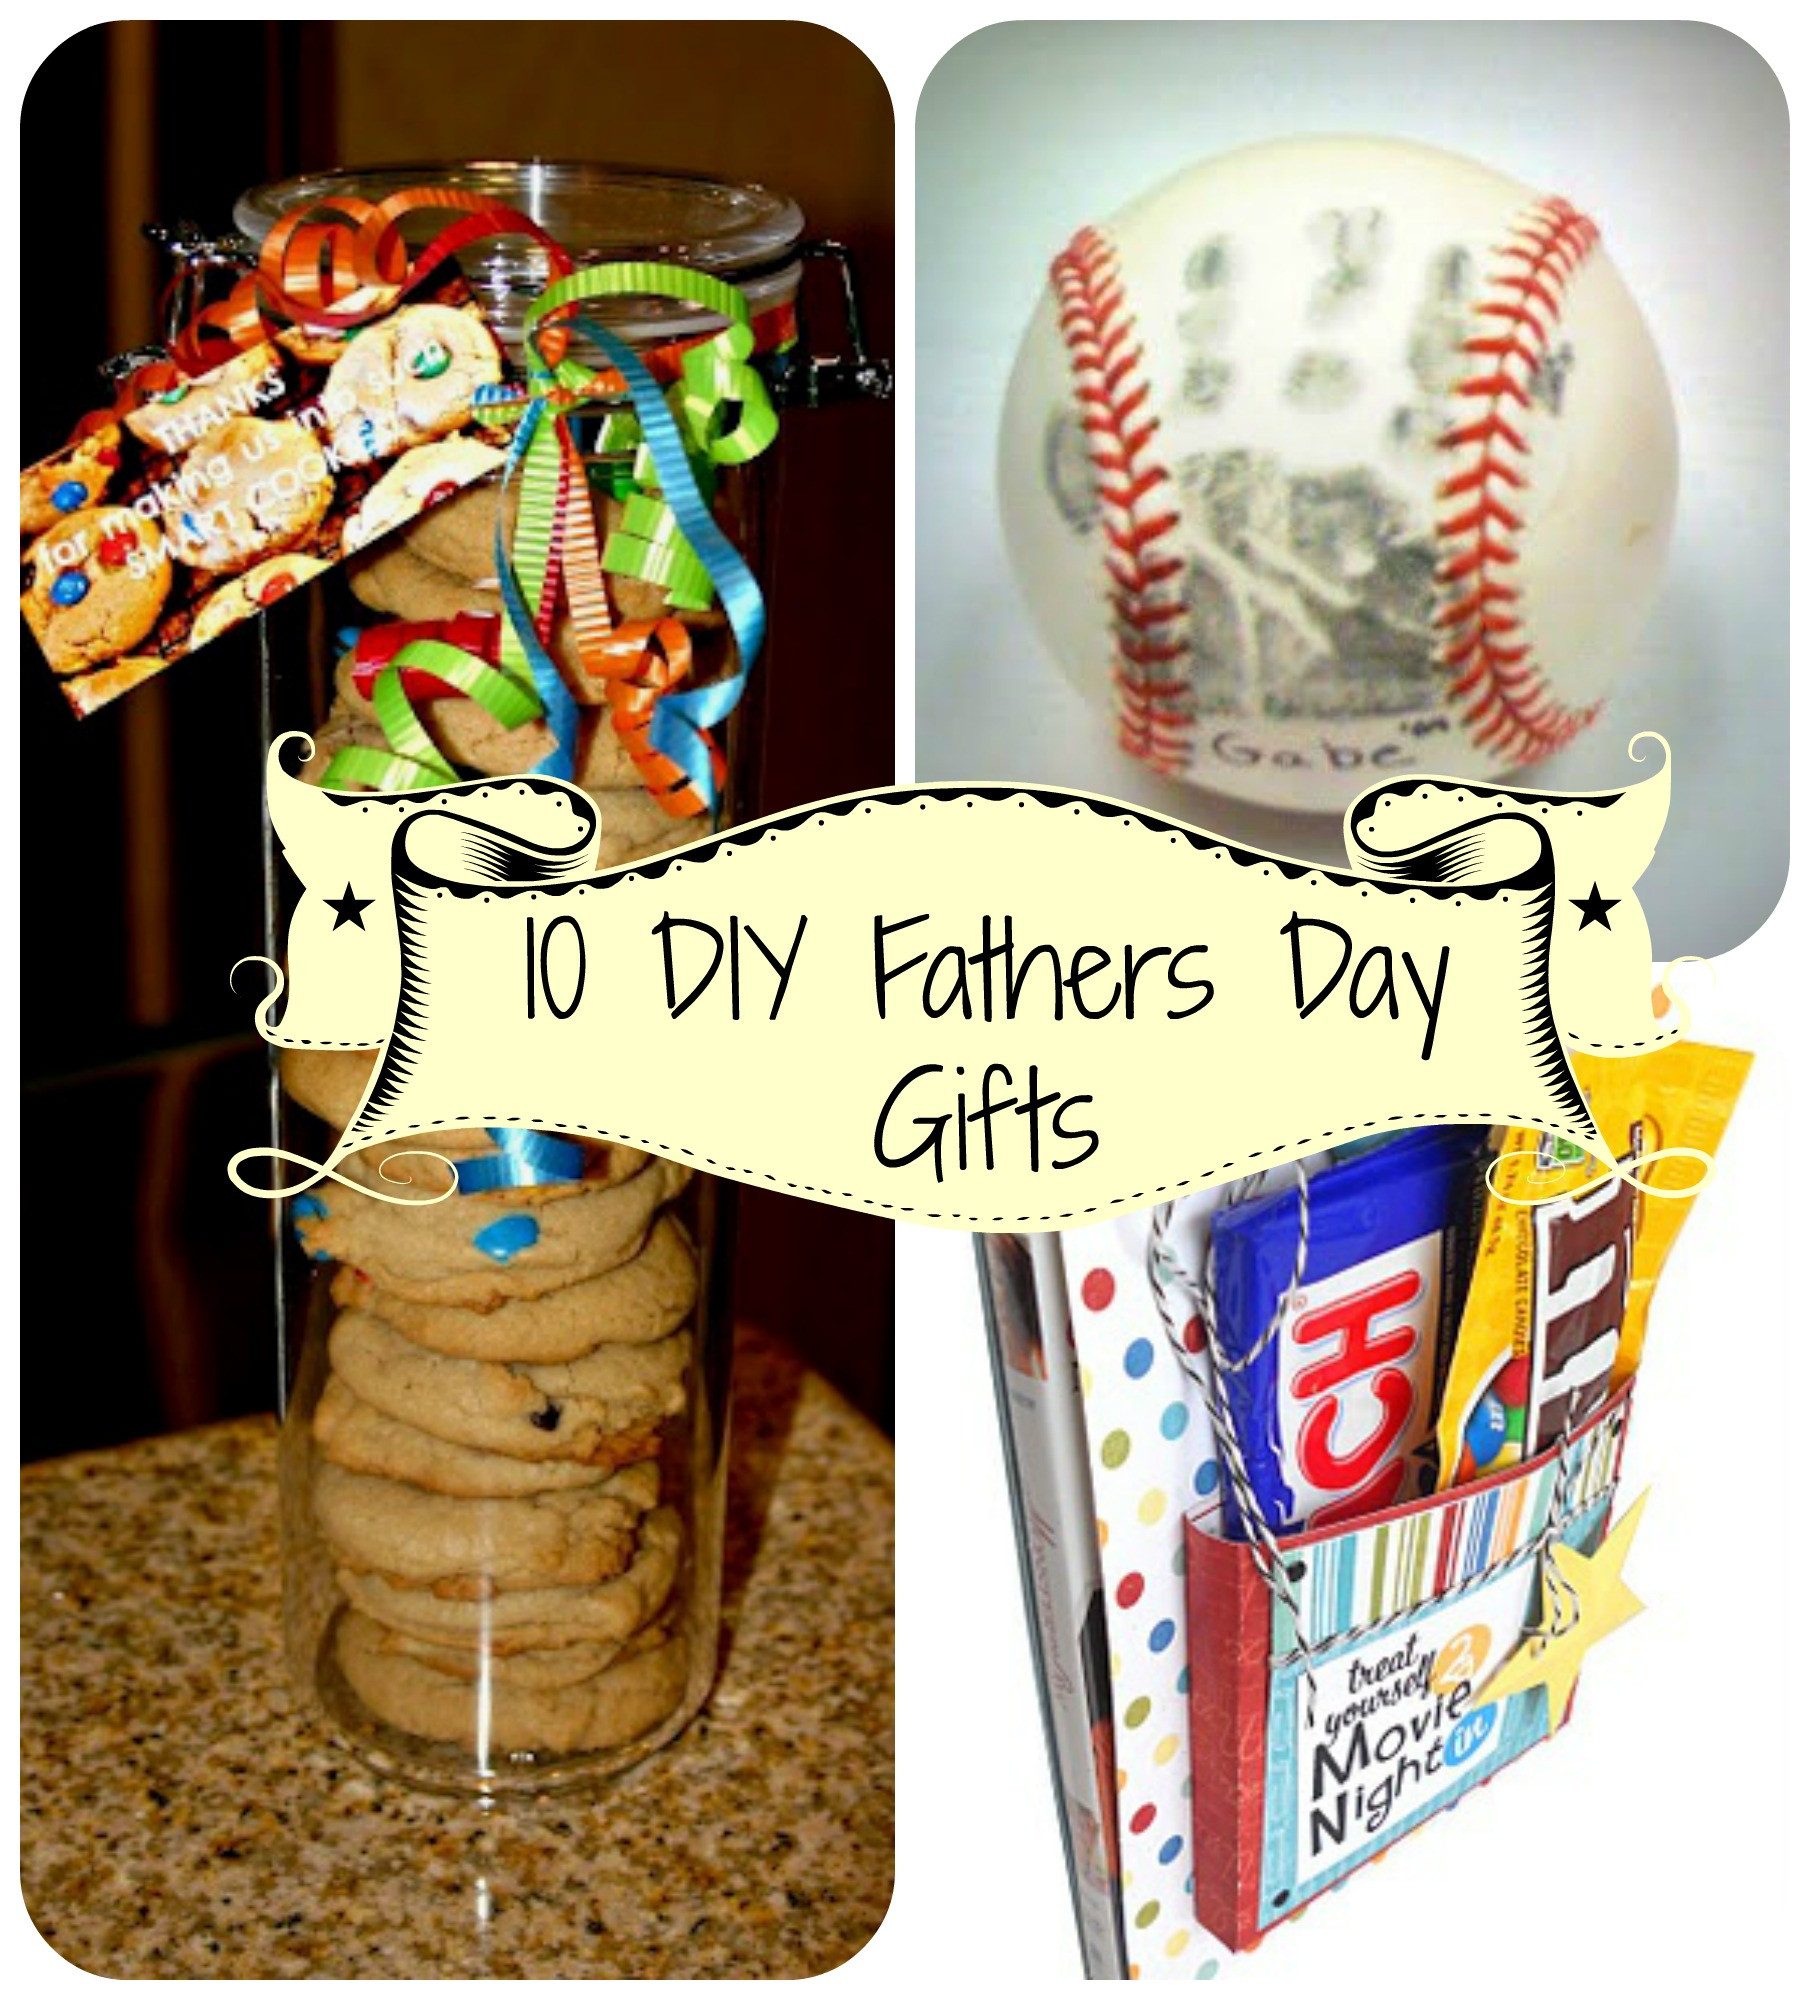 DIY Fathers Day Gifts From Kids
 10 Easy DIY Fathers Day Gifts